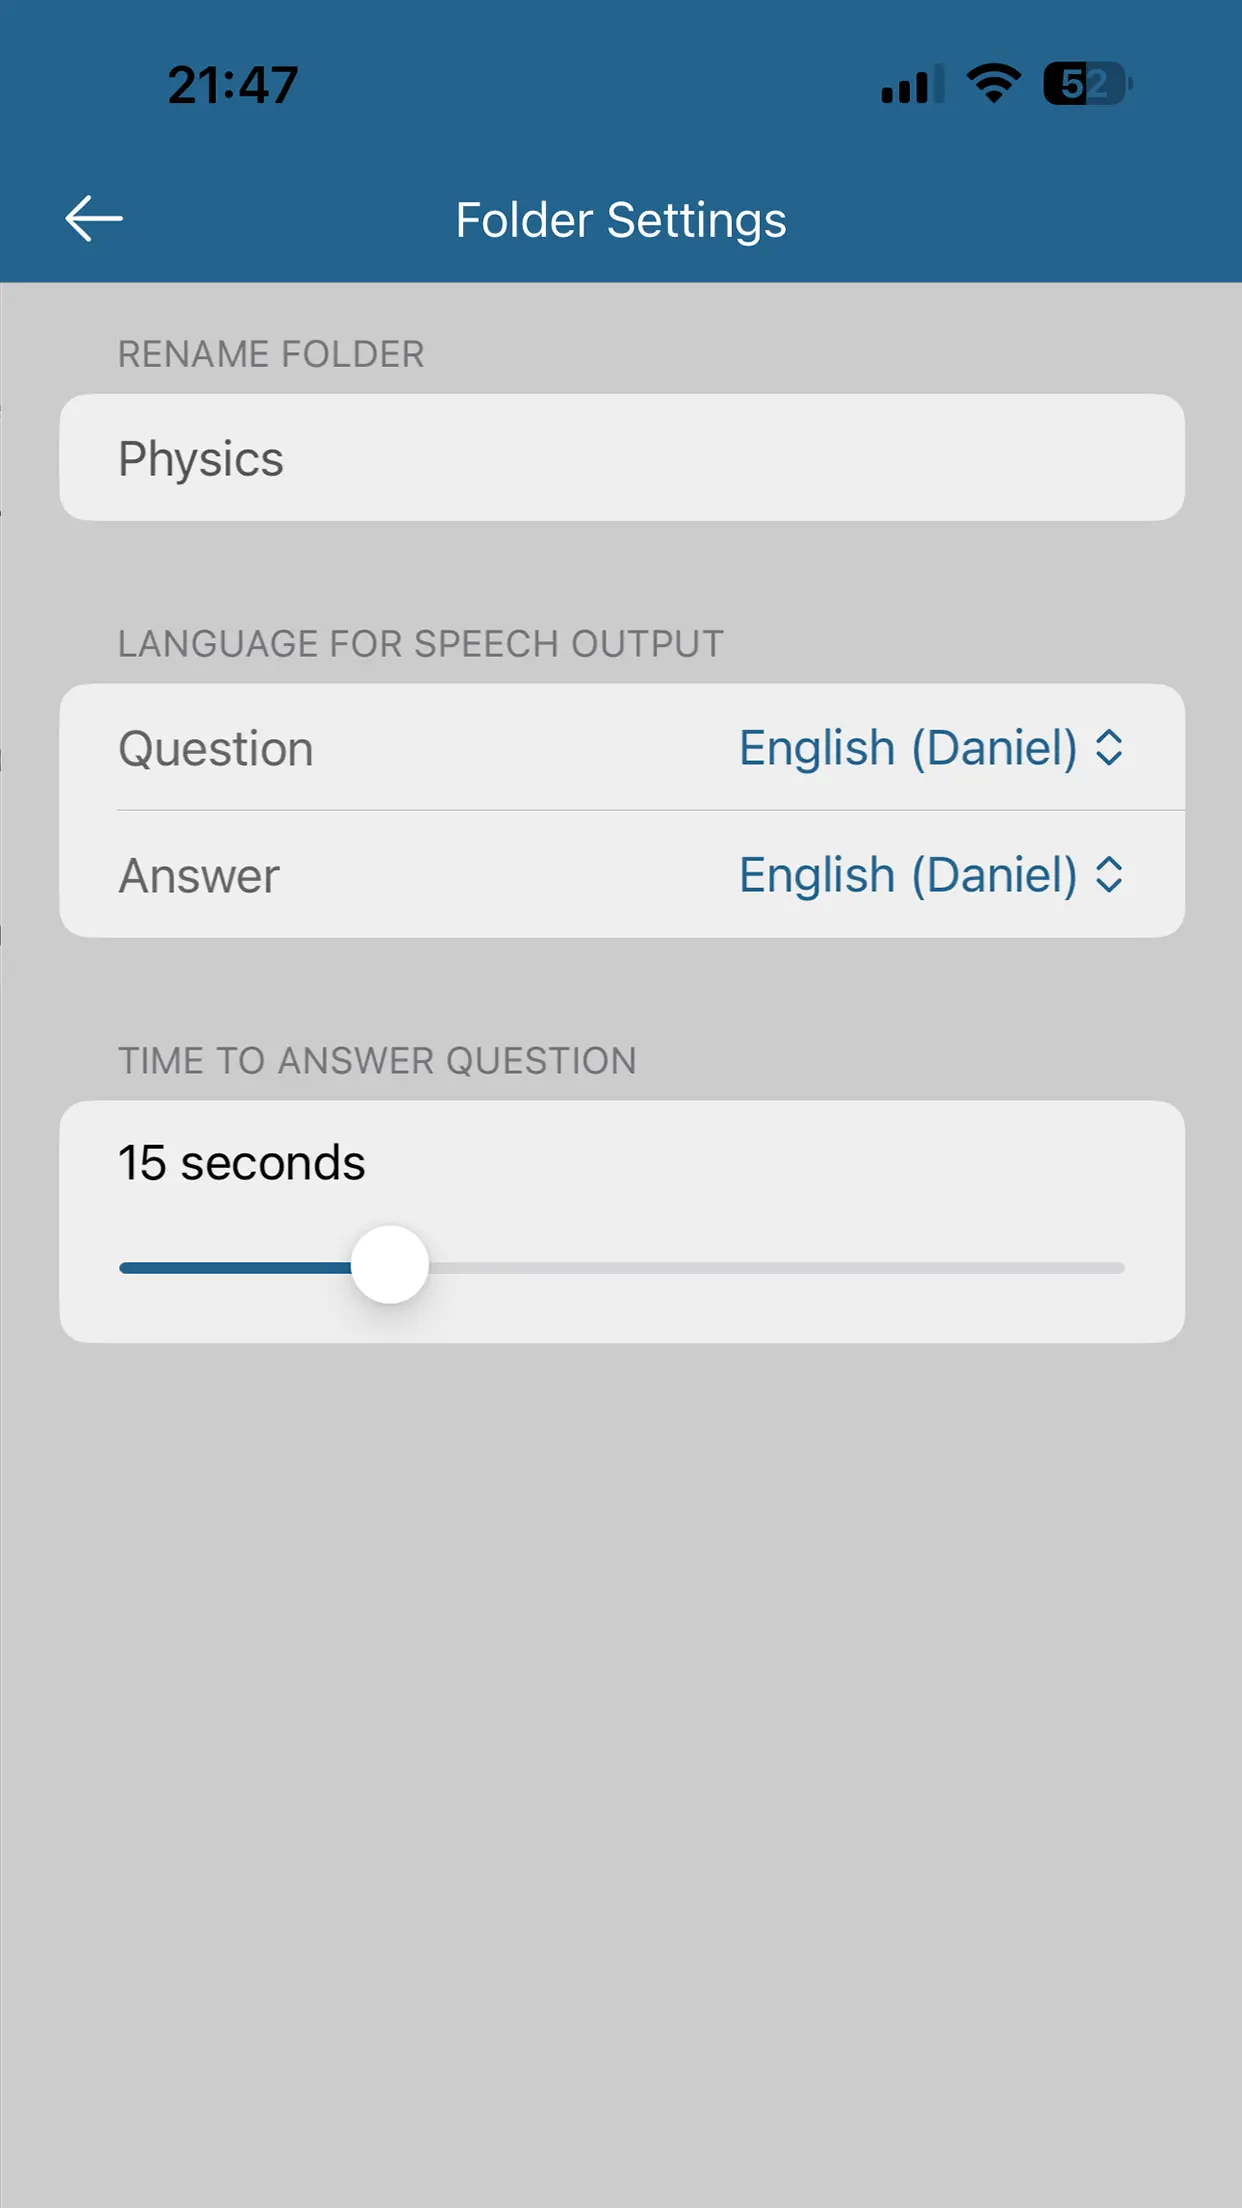 Folder settings with speech output and countdown feature.